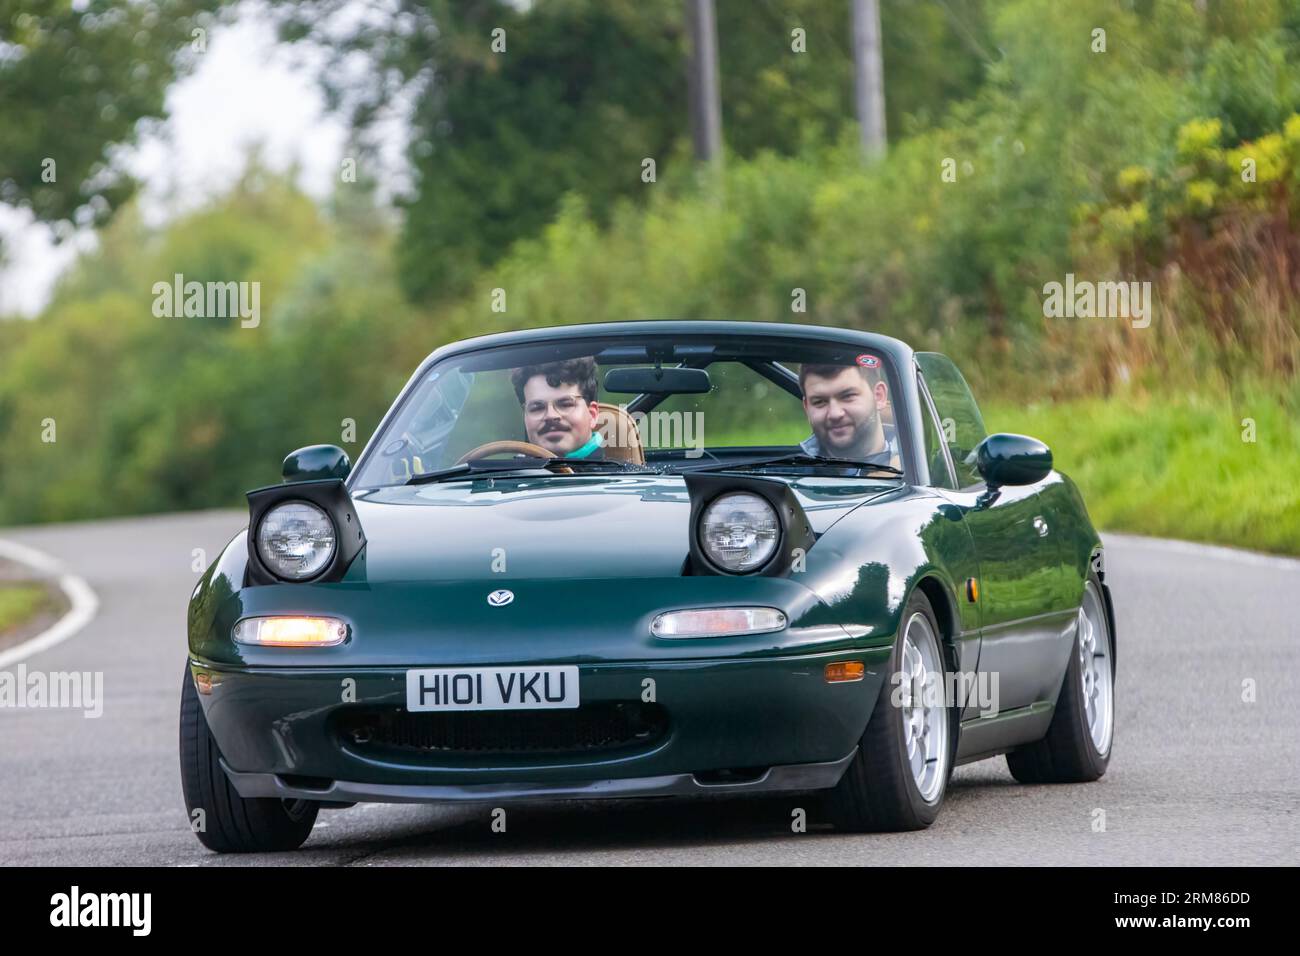 Whittlebury,Northants,UK -Aug 26th 2023: 1990 green Mazda MX 5 sports car with pop up headlights travelling on an English country road Stock Photo